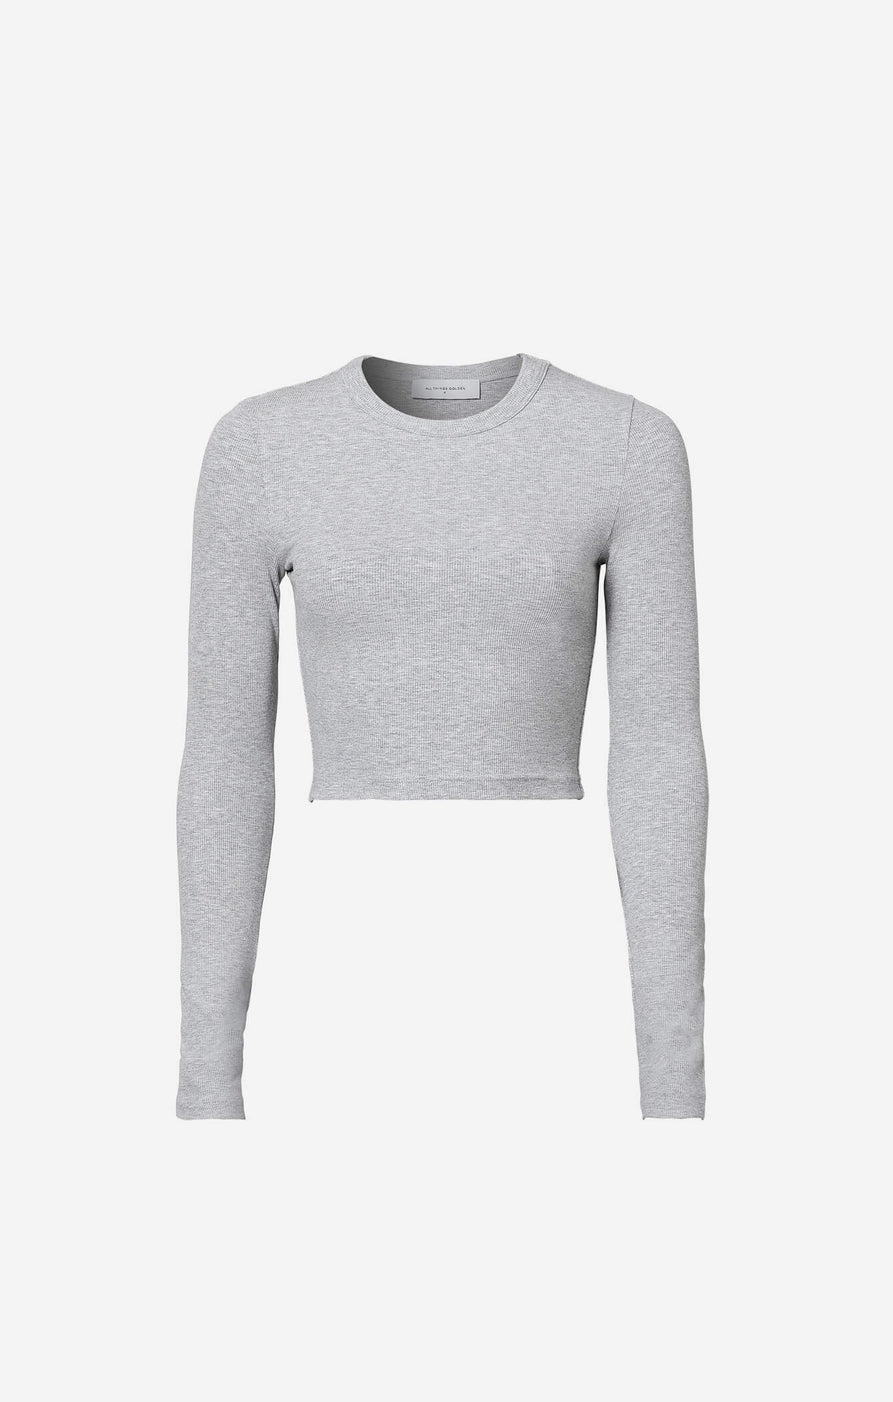 THE LUXE RIB L/S CROP - MID GREY